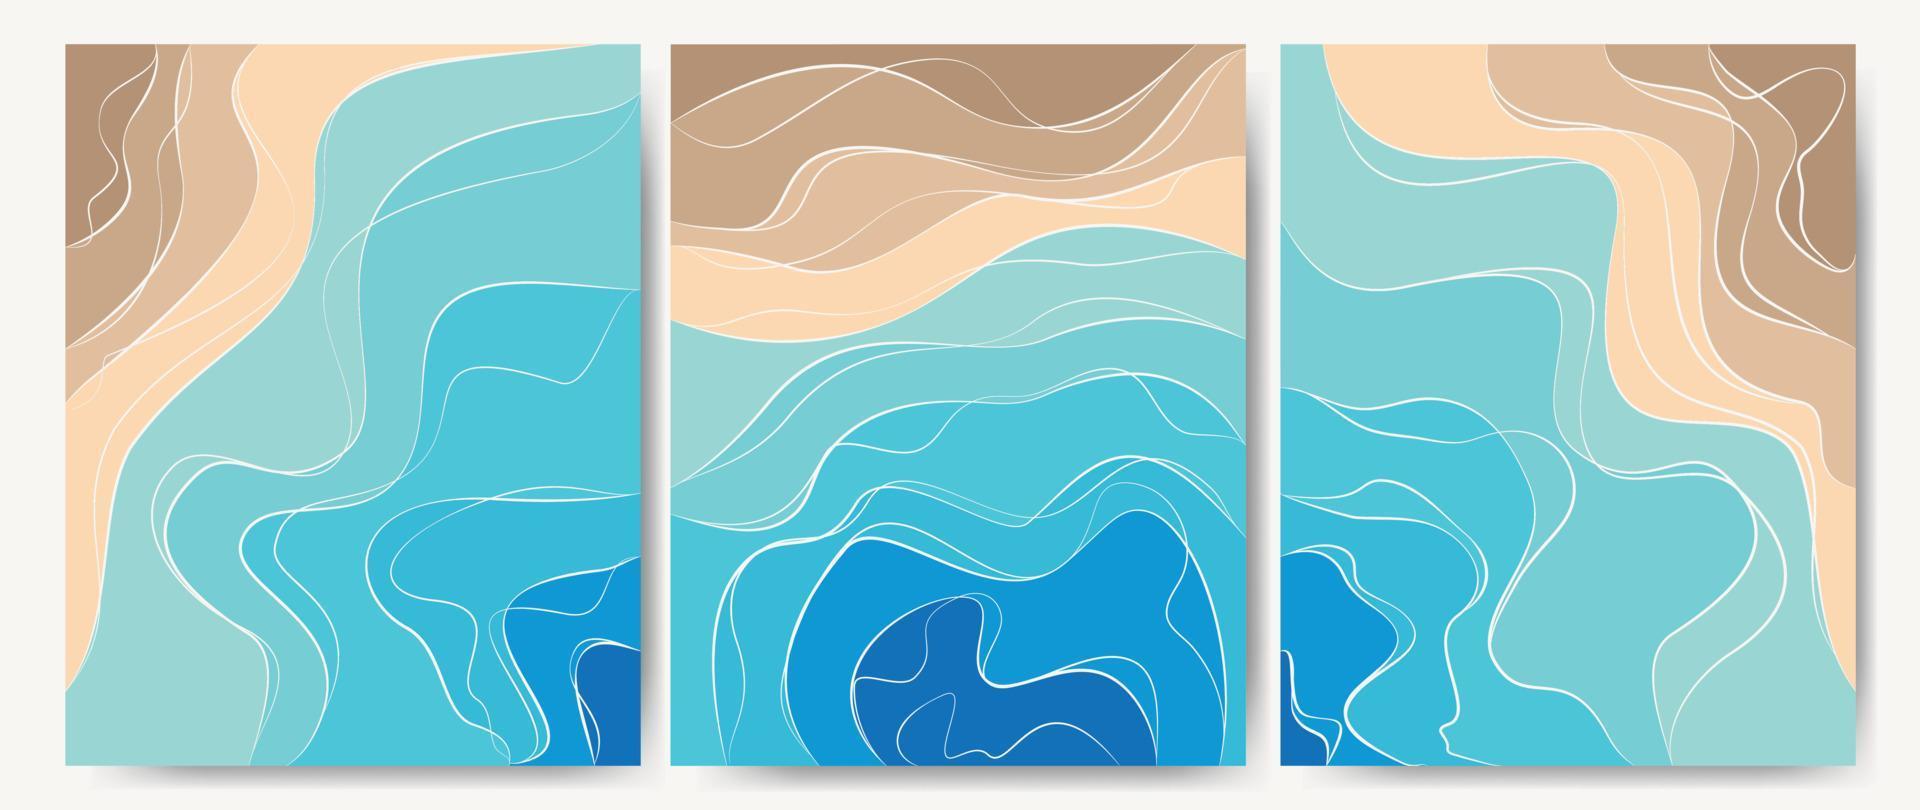 Abstract background sunny sea beach. Summer time theme. Template design texture water and sand with a pattern of wavy lines. Great for covers, fabric prints, wallpapers. Vector. vector